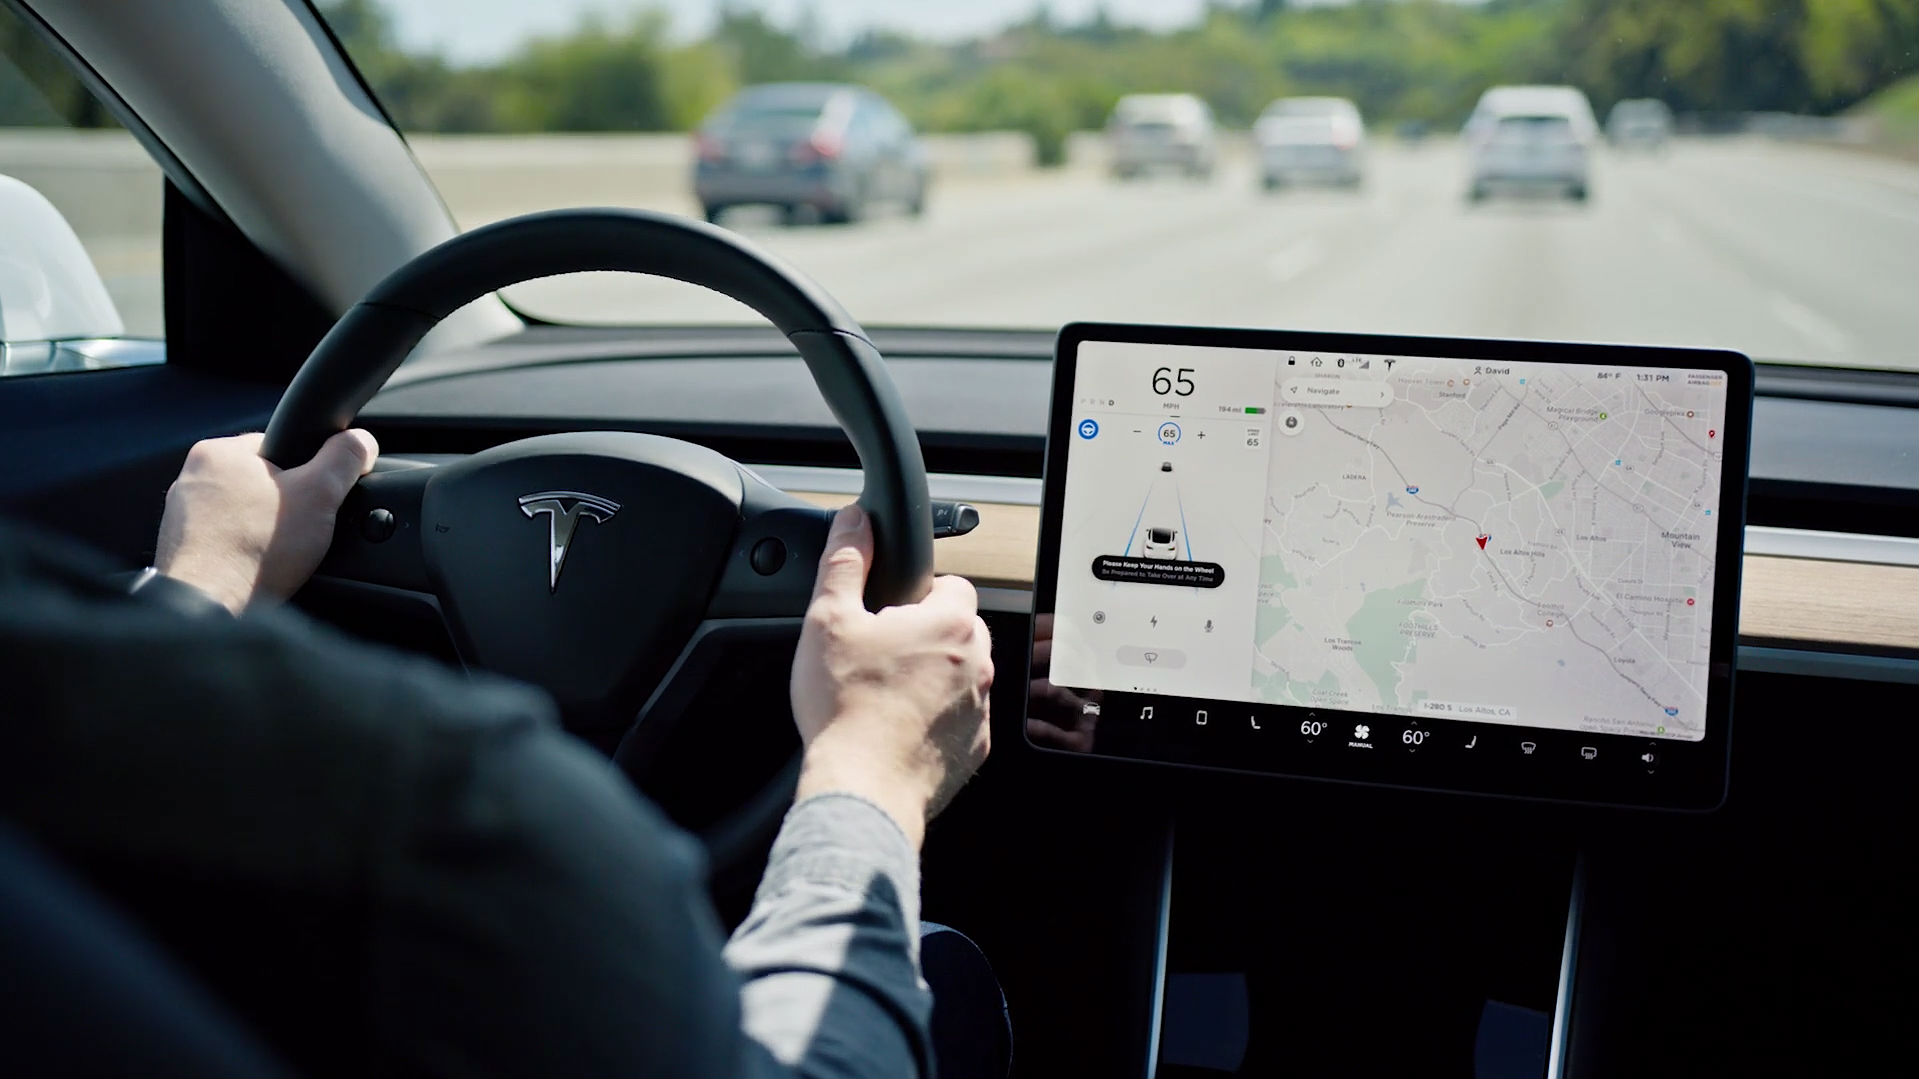 Tesla owners who ordered Full Self-Driving will get free HW3 upgrade, says Elon Musk